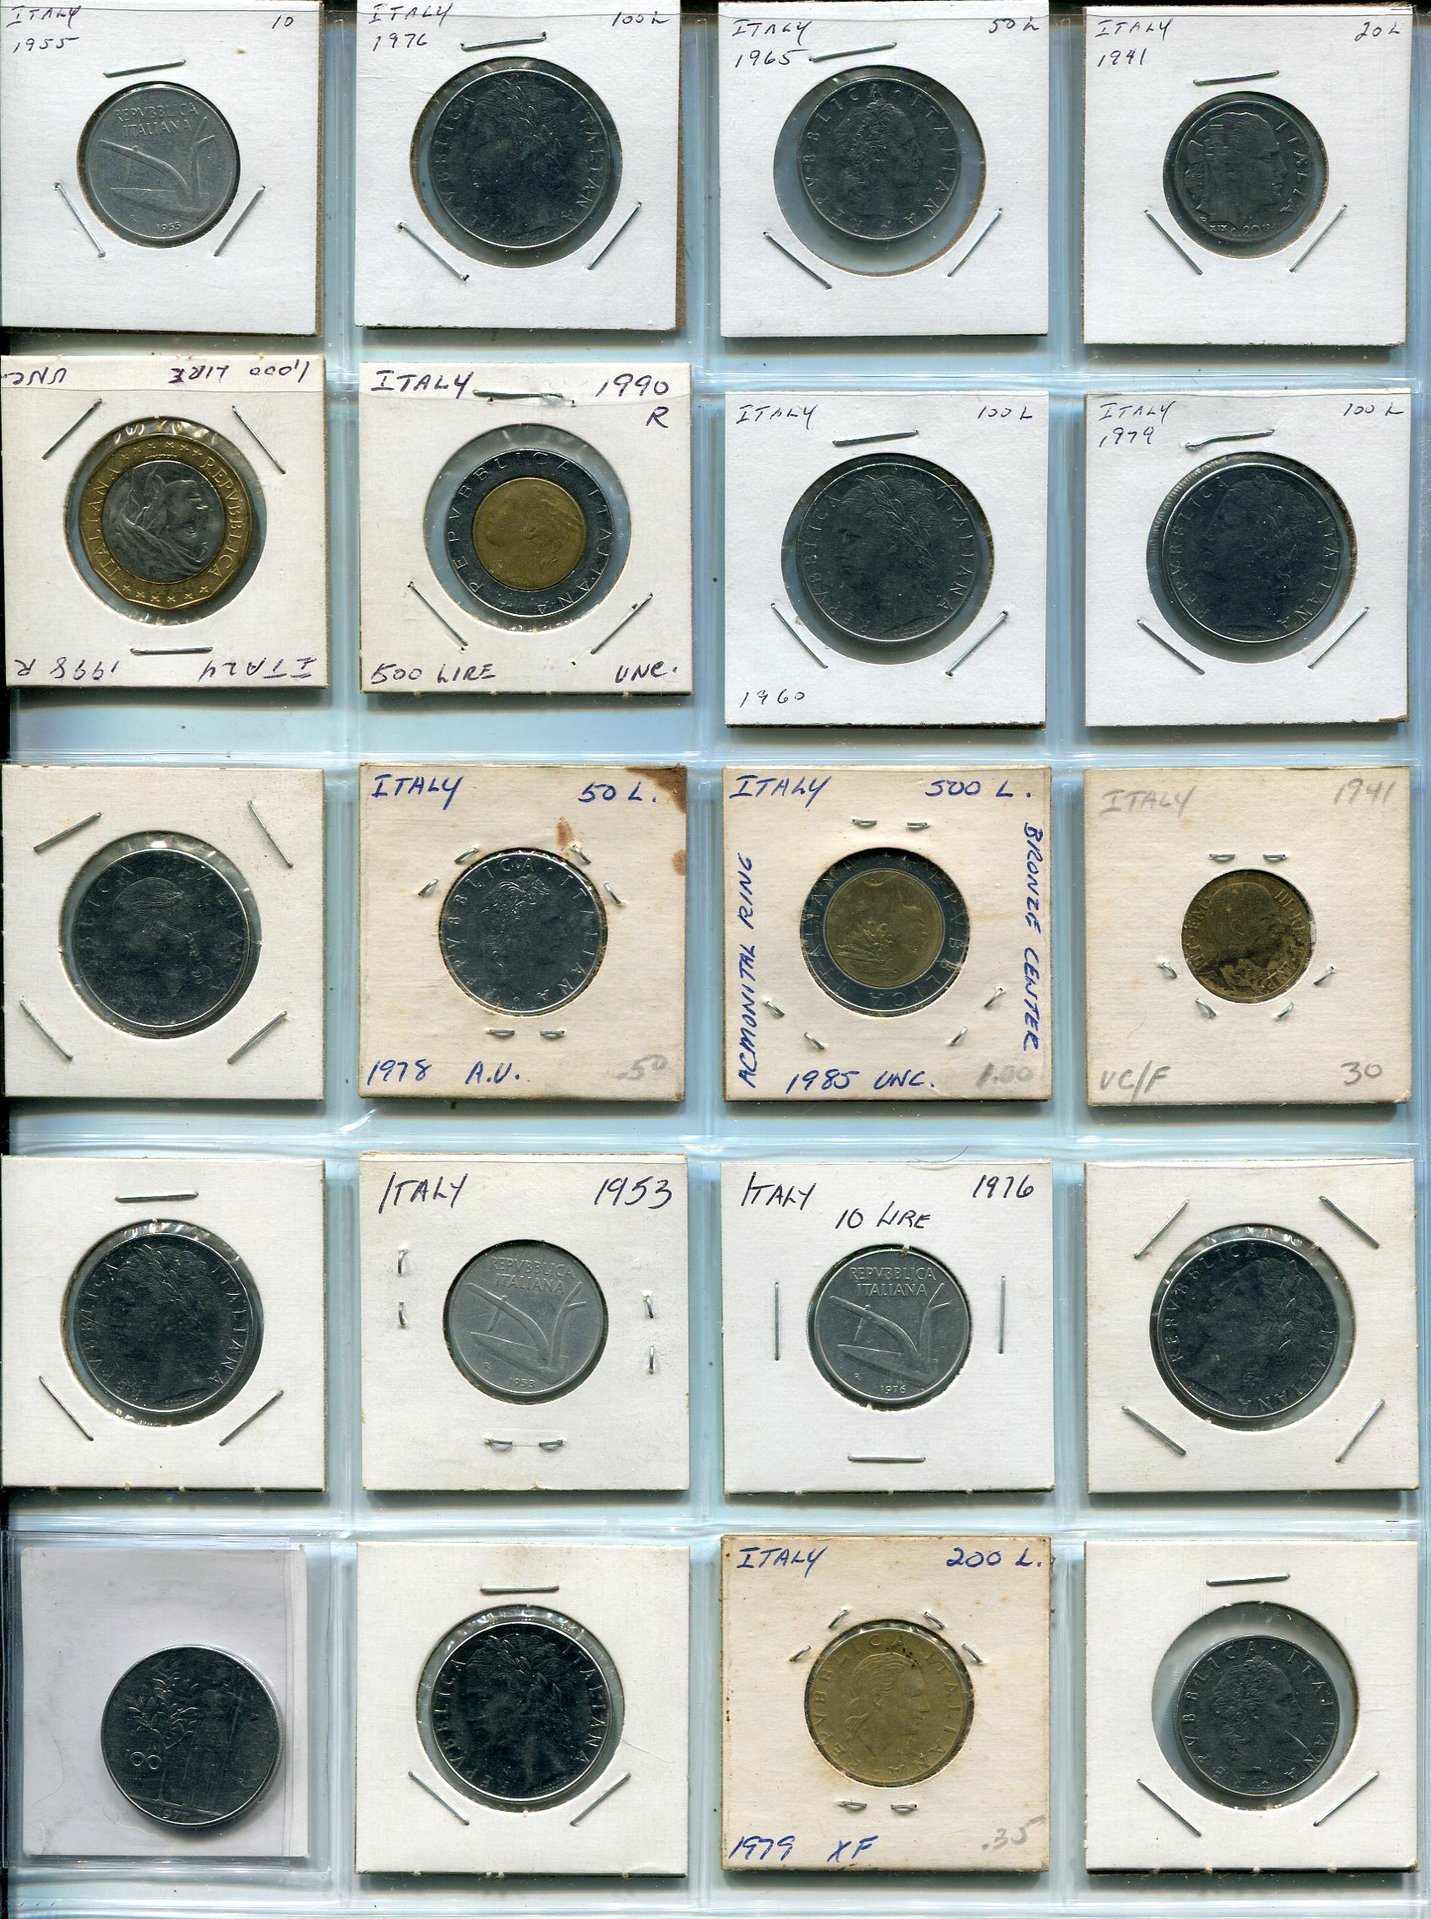 1 italy lot of 20 coins.jpg